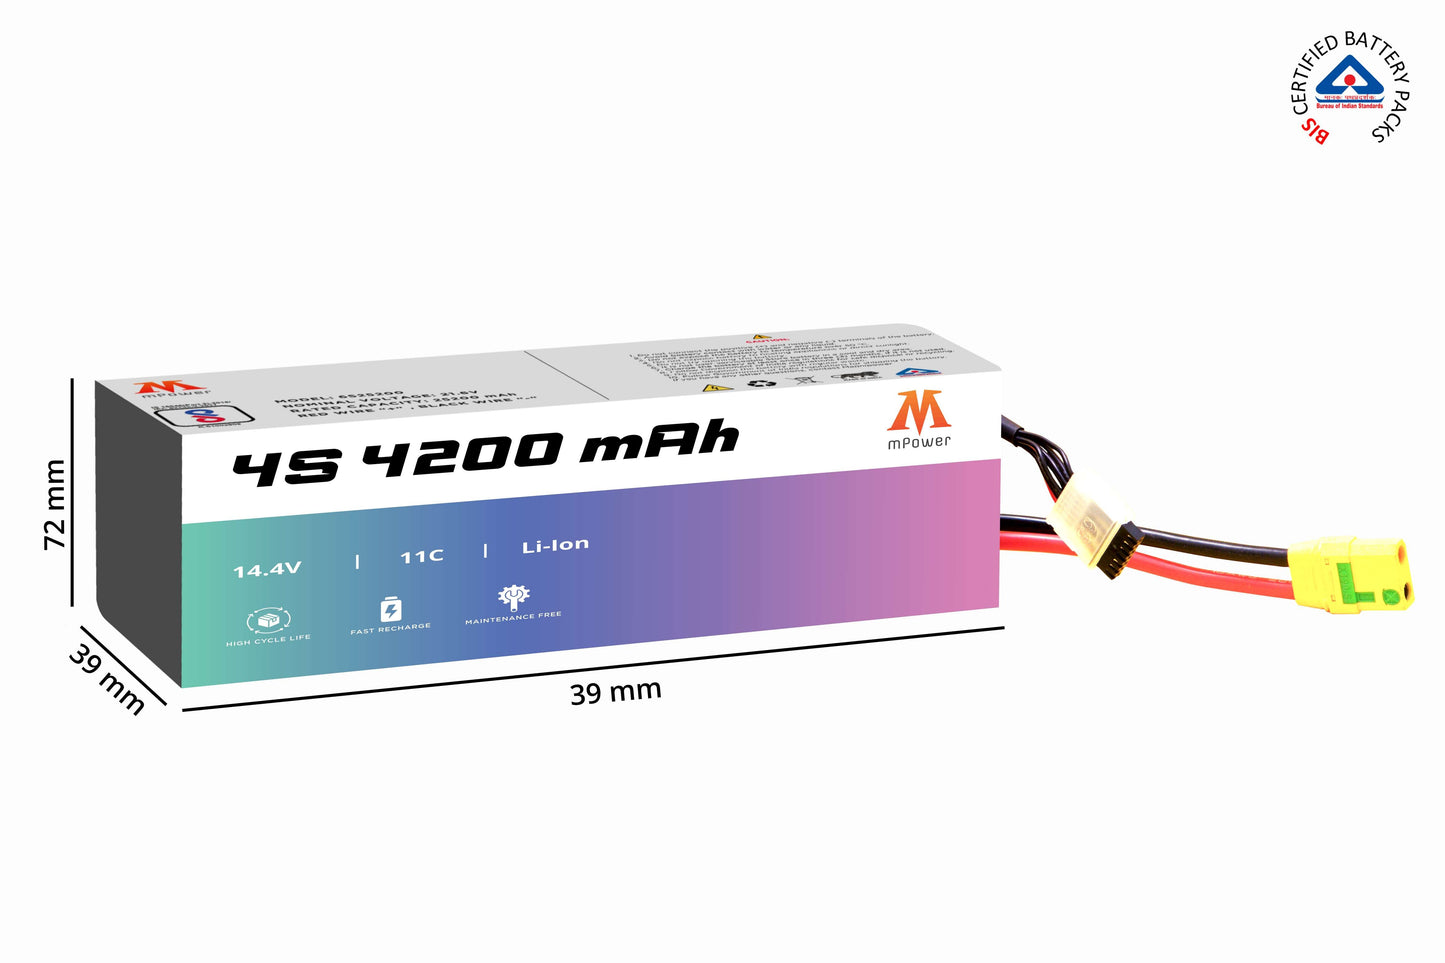 mPower 4S 4200mAh Lithium-Ion Battery for Survey Drones